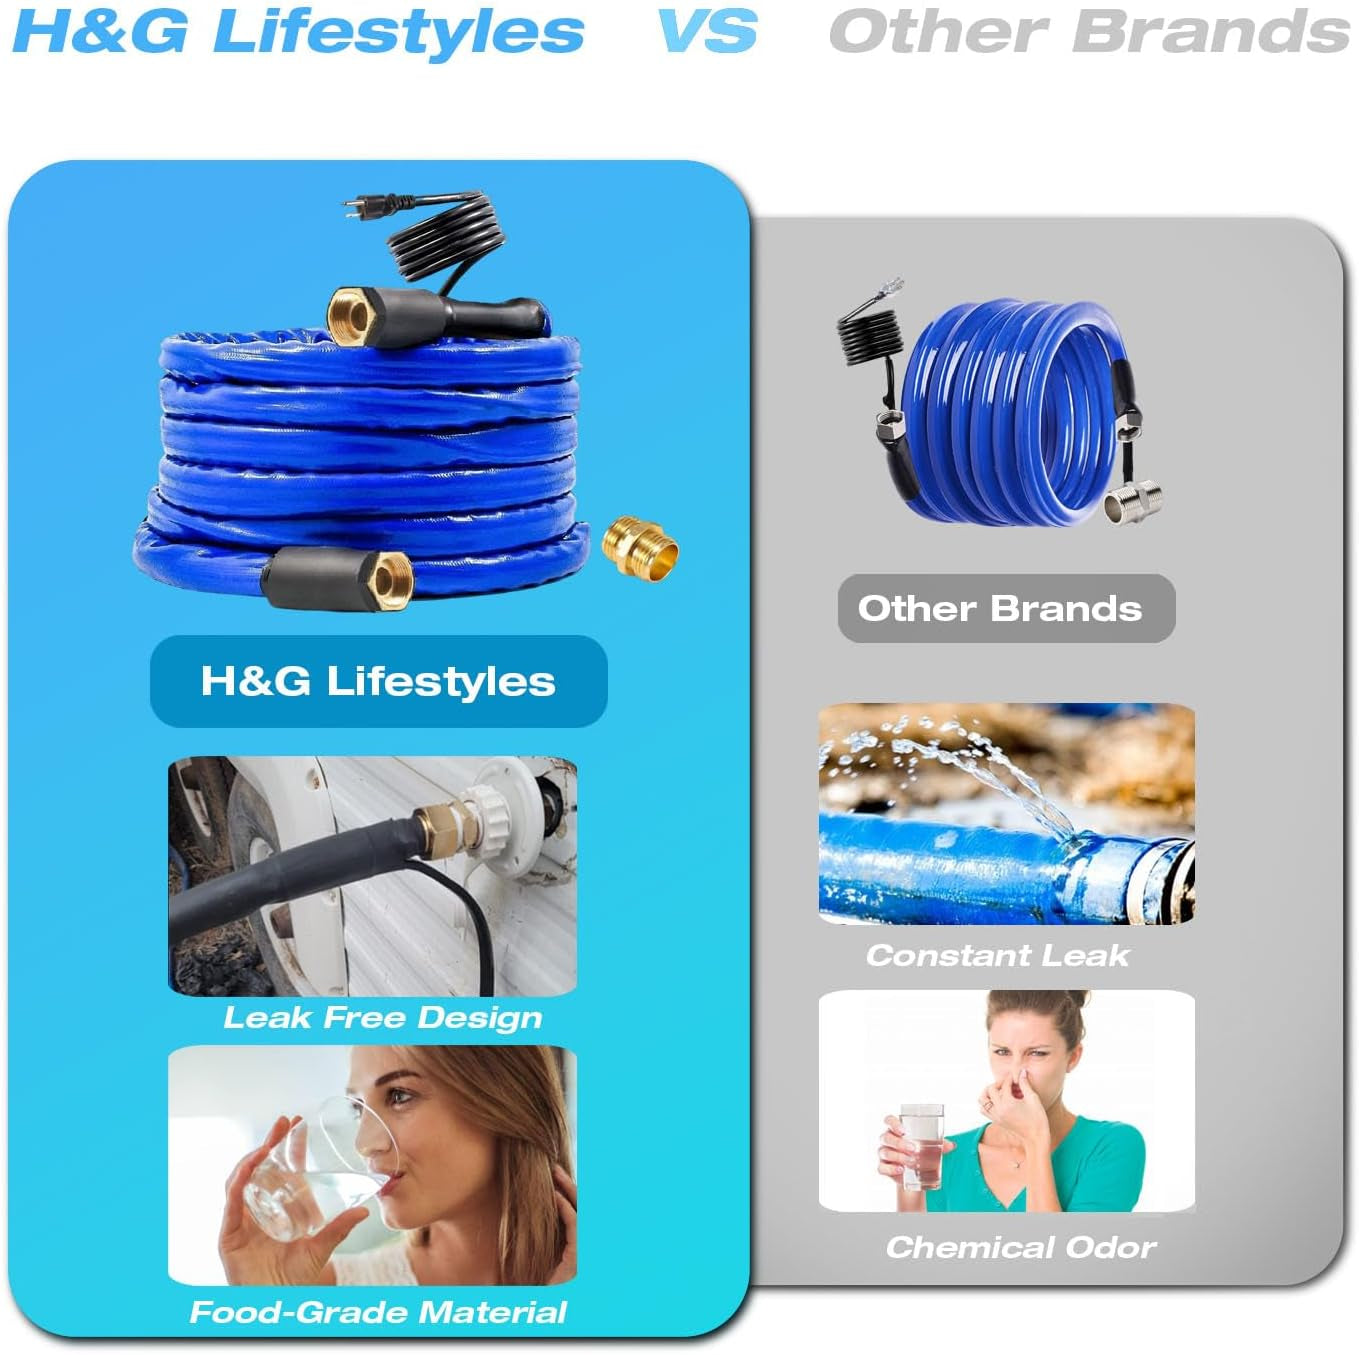 H&G Lifestyles 25Ft RV Heated Water Hose for Camper Insulated Hose Self-Regulating Freeze Protection -45℉ Winterizing Kit 1/2" Inner